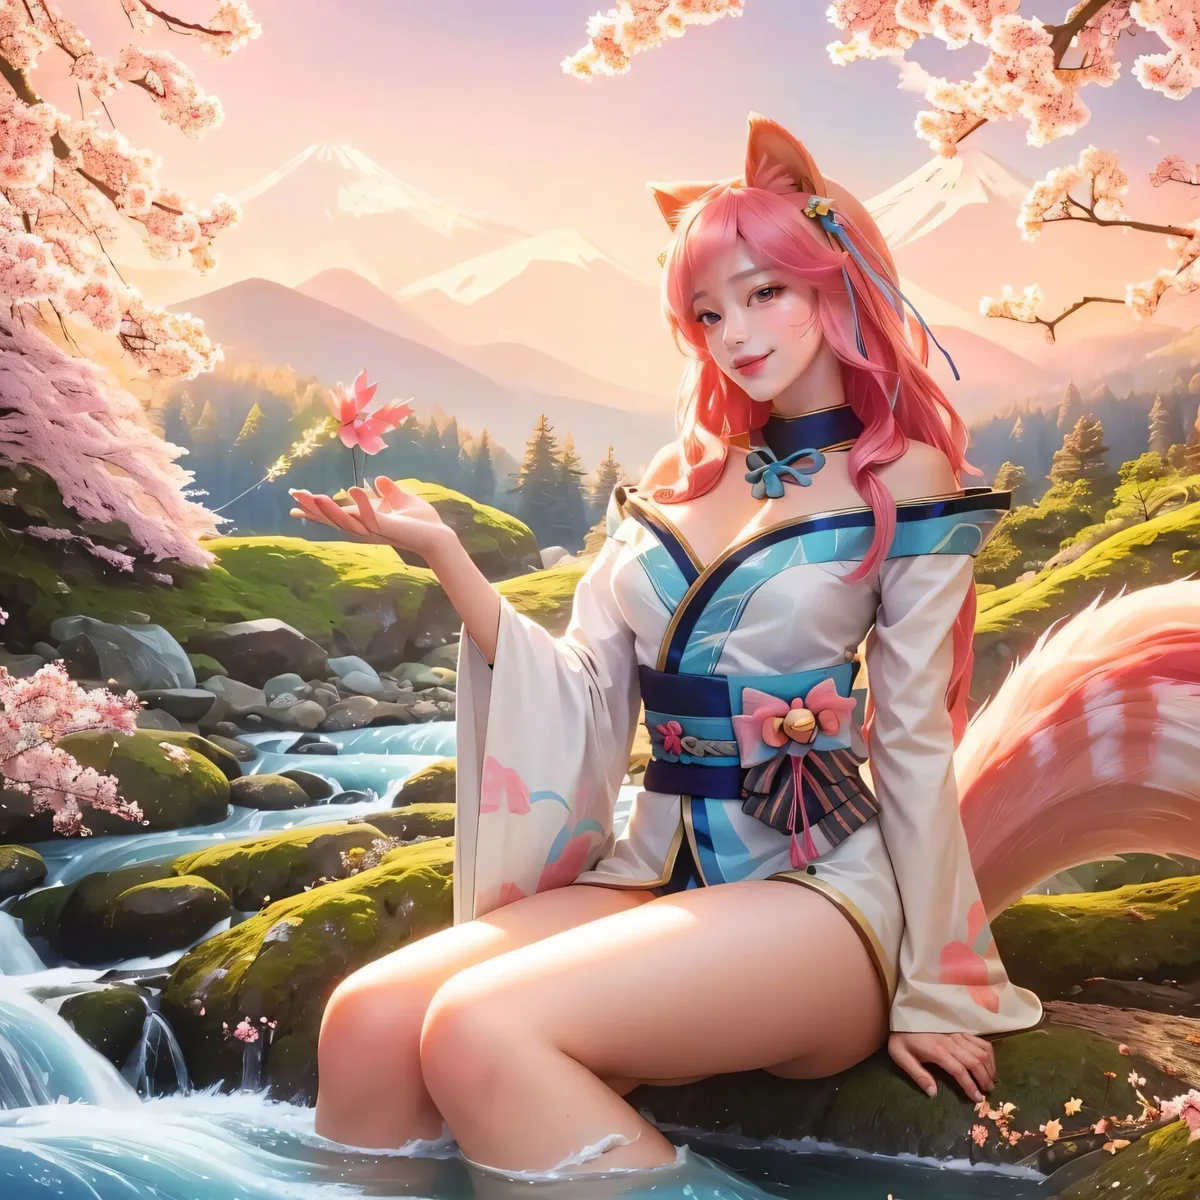 An AI generated image produced using stable diffusion of a kitsune girl with pink hair and fox ears, dressed in traditional attire, sitting by a tranquil stream surrounded by cherry blossoms with majestic mountains in the background.